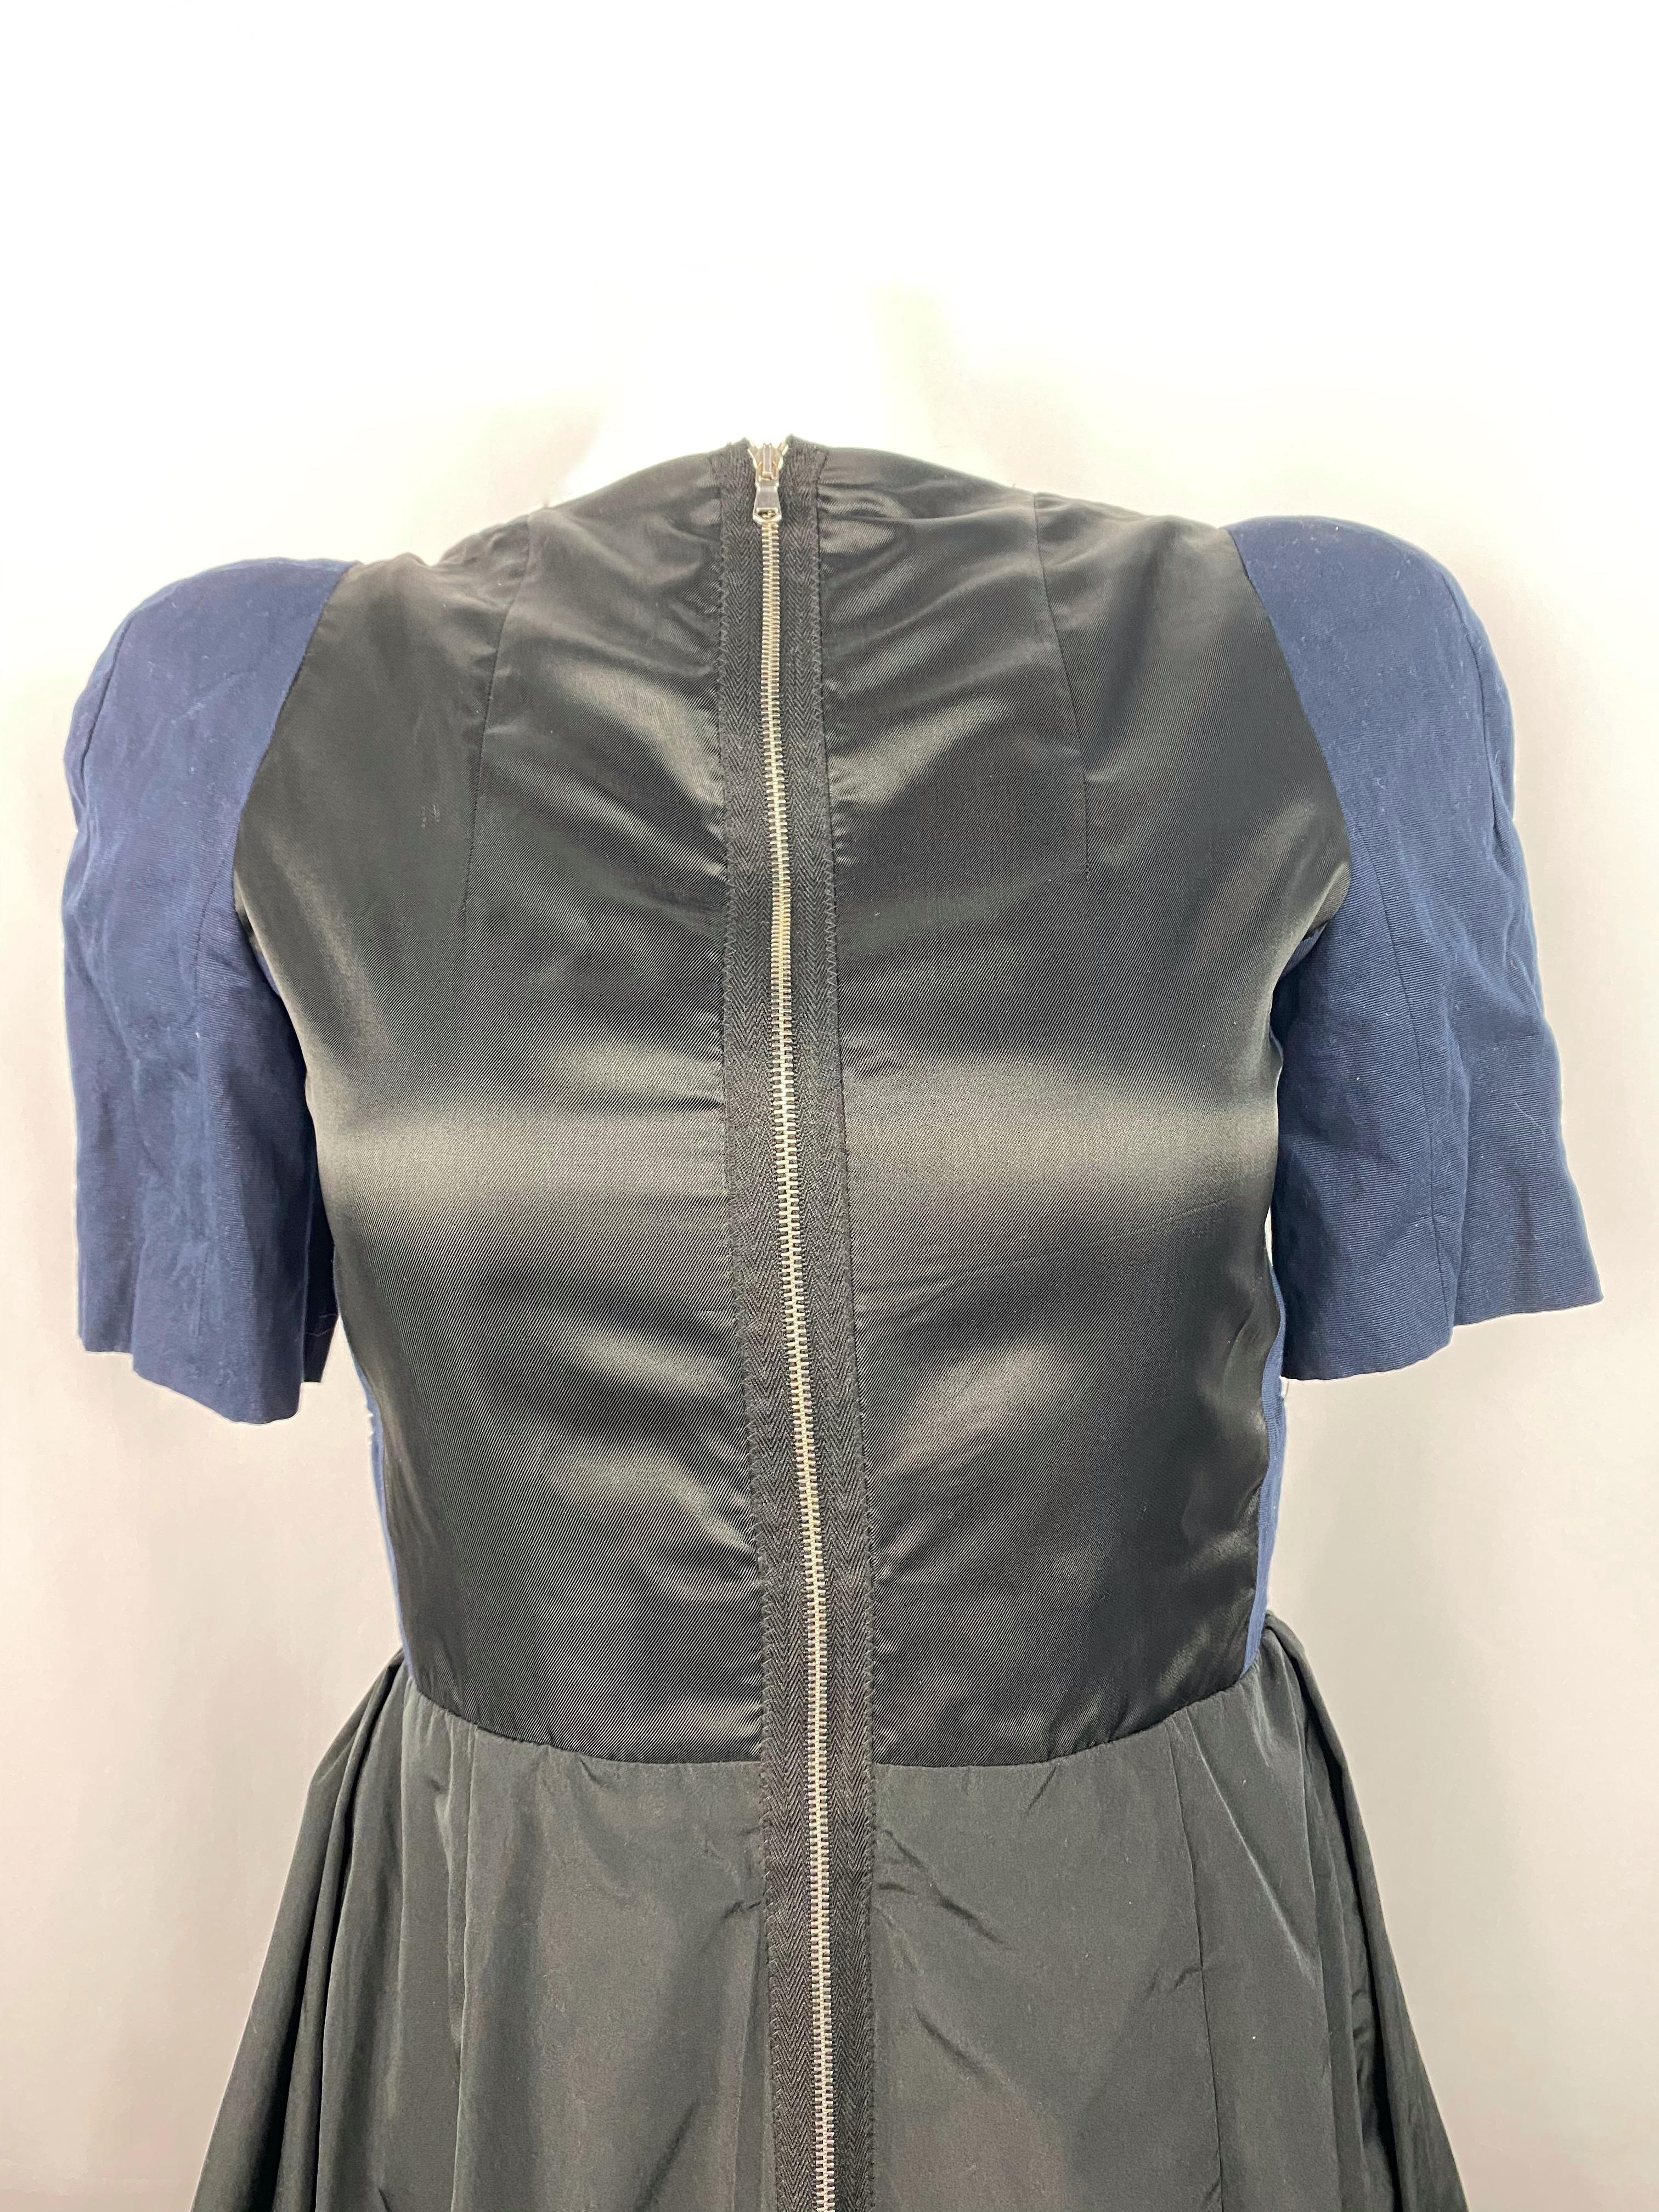 Product details:
Size 40.
Featuring silver tone front zip closure, open back with rear button closure, black ruffled skirt and navy short balloon sleeves.
Made in Hungary.